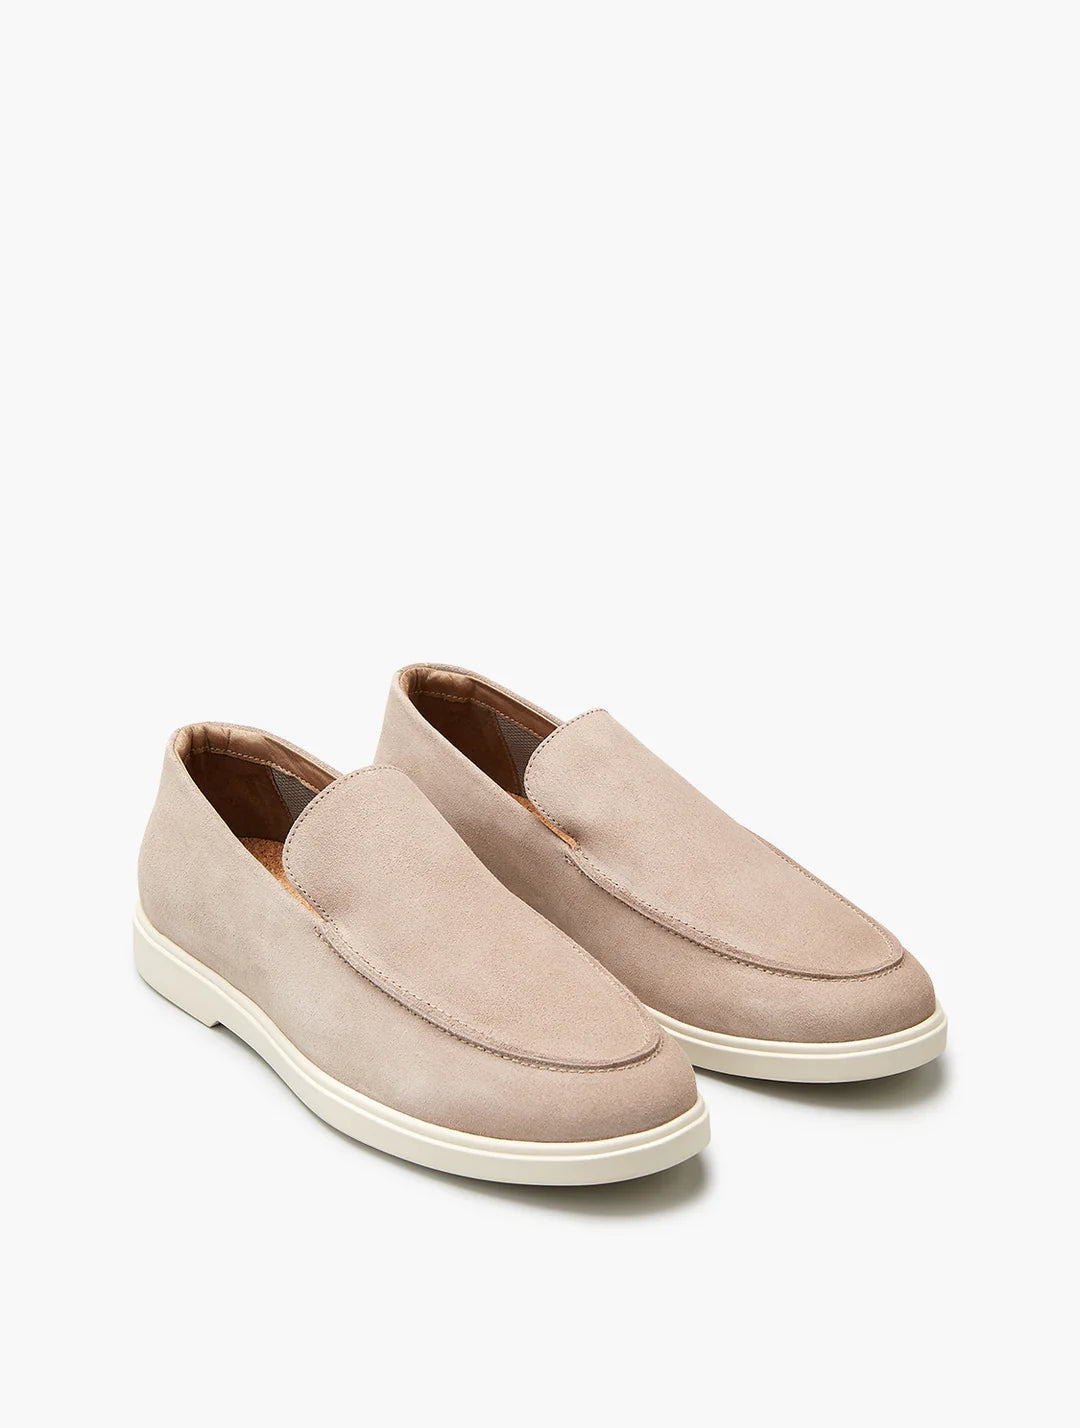 Miguel Truffle Suede Loafers